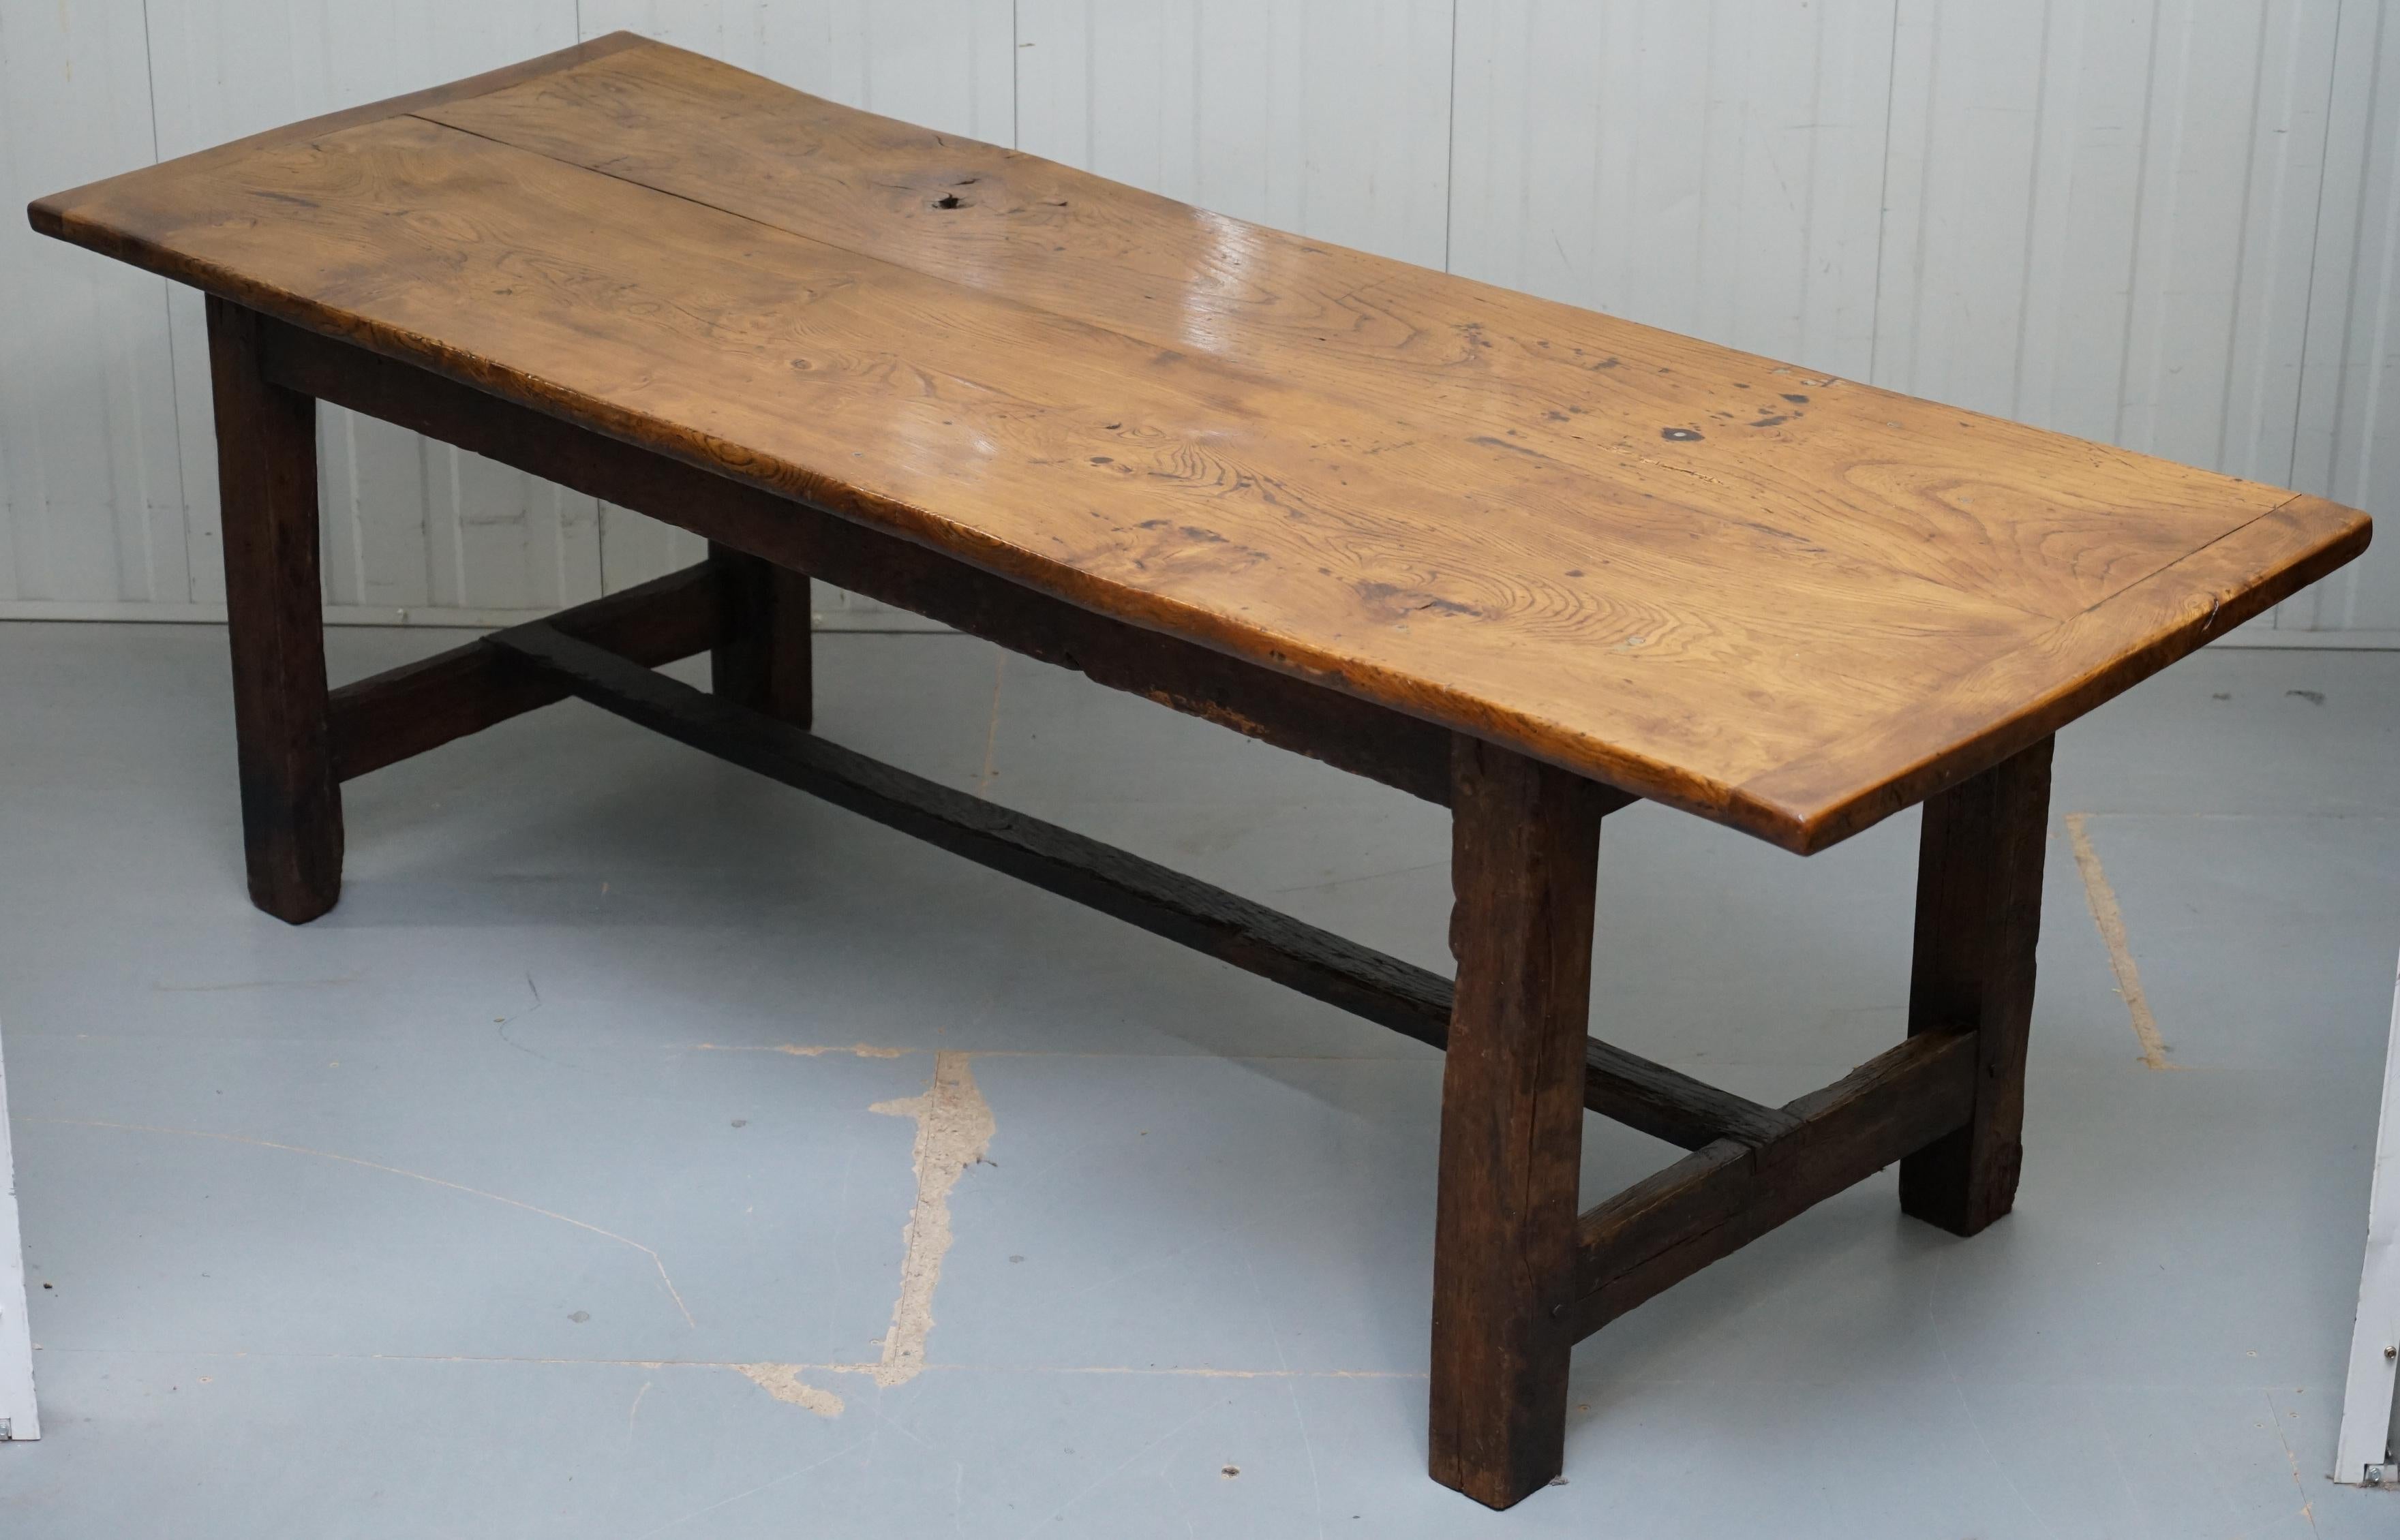 We are delighted to offer for sale this absolutely stunning original 18th century solid Elm farmhouse country heavily used dining table that seats 8-10 people

If you’re looking for the real deal then look no further, this table is just about as